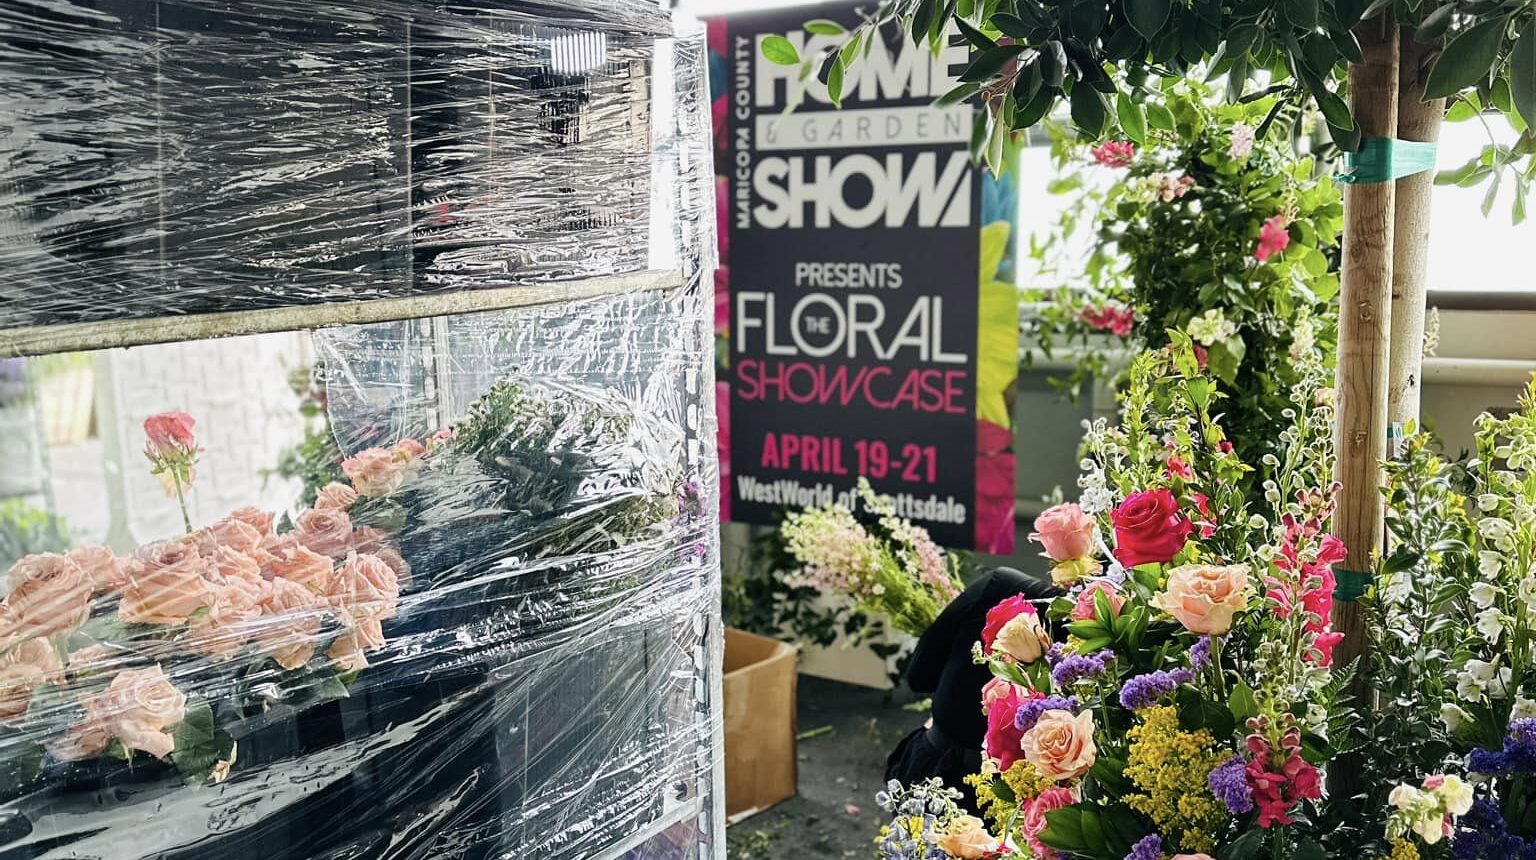 Maricopa County Home and Garden Show's new Floral Showcase coming to Scottsdale this weekend